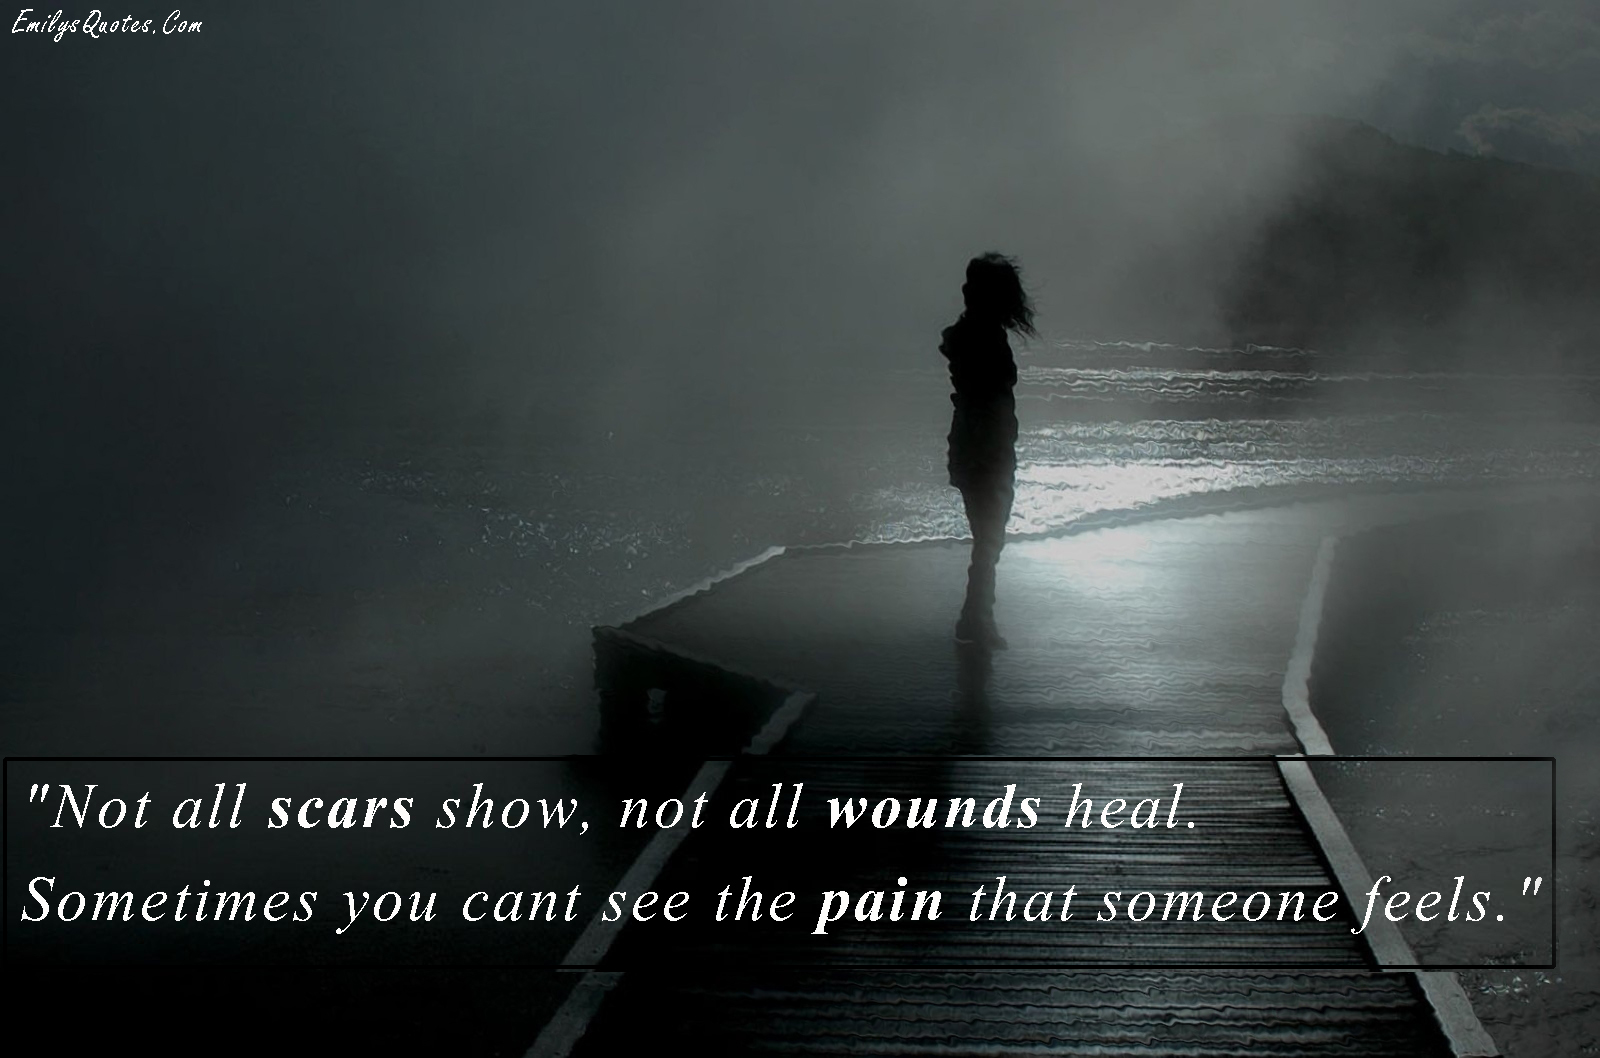 Not all scars show, not all wounds heal. Sometimes you can’t see the pain that someone feels